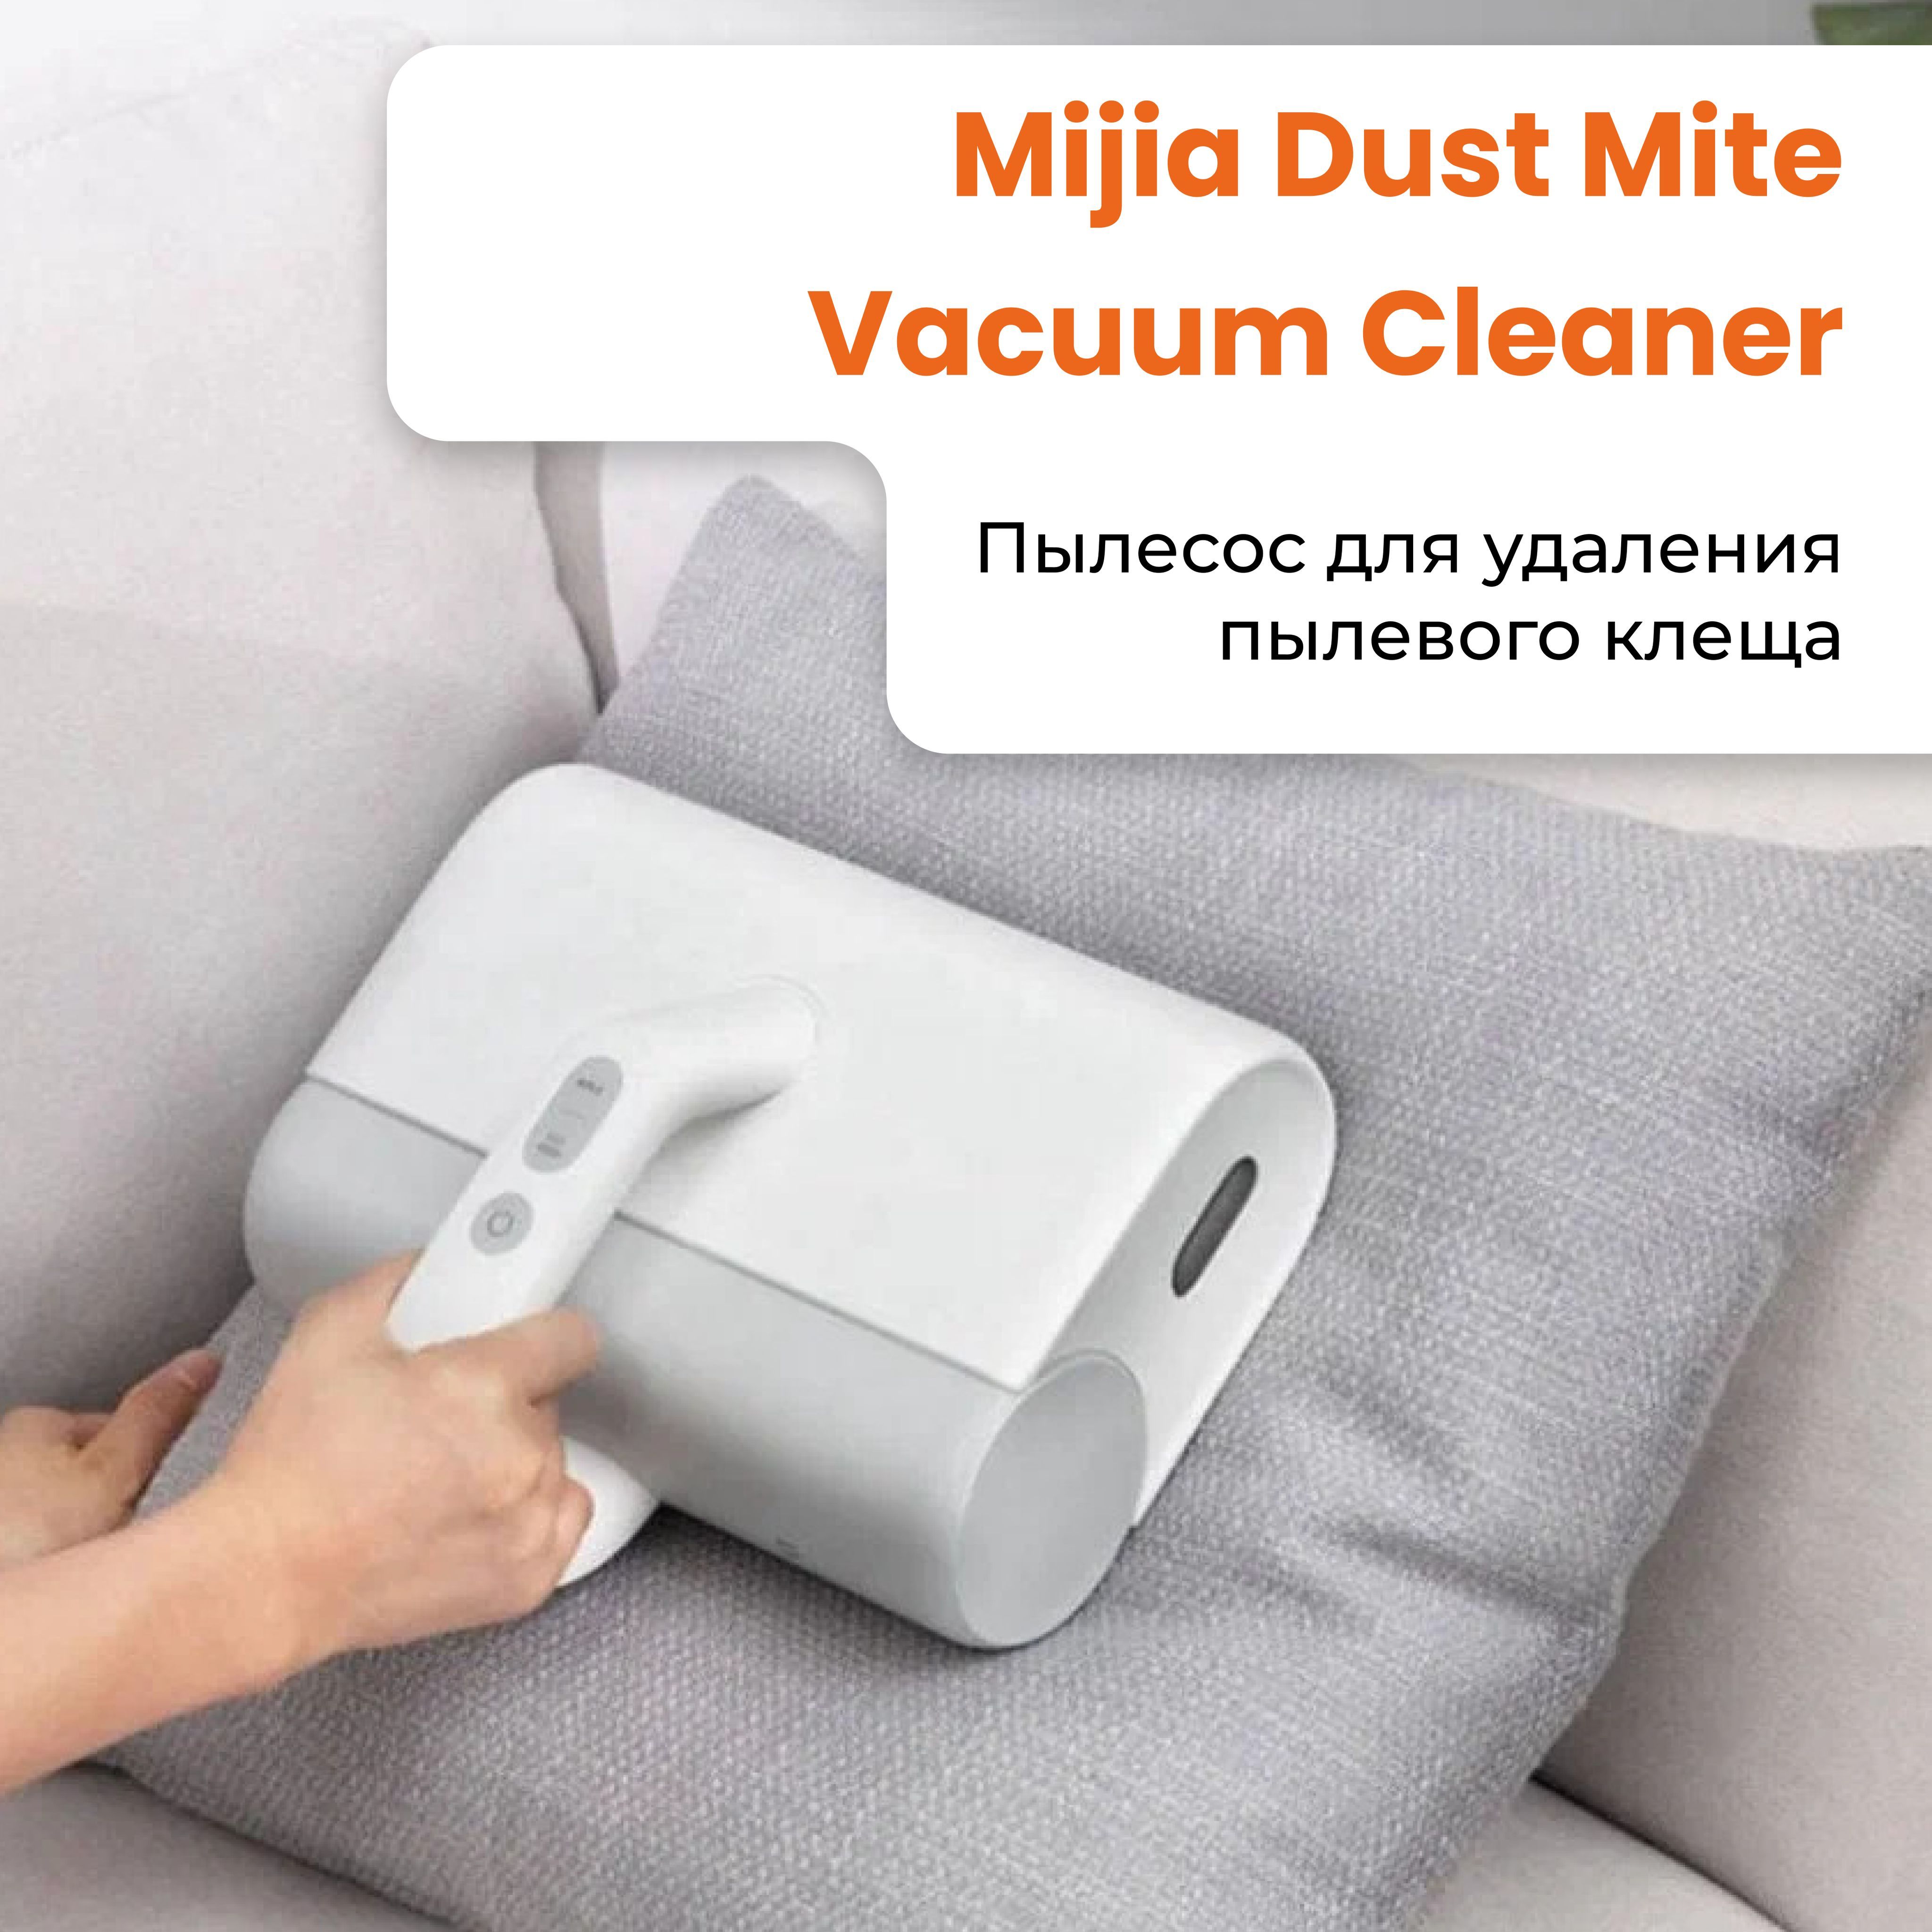 Cleaner mjcmy01dy. Пылесос Xiaomi (mjcmy01dy). Xiaomi Mijia Dust Mite Vacuum Cleaner. Vacuum Cleaner Dust&Mite. Xiaomi Dust Mite Vacuum Cleaner mjcmy01dy лампочка.